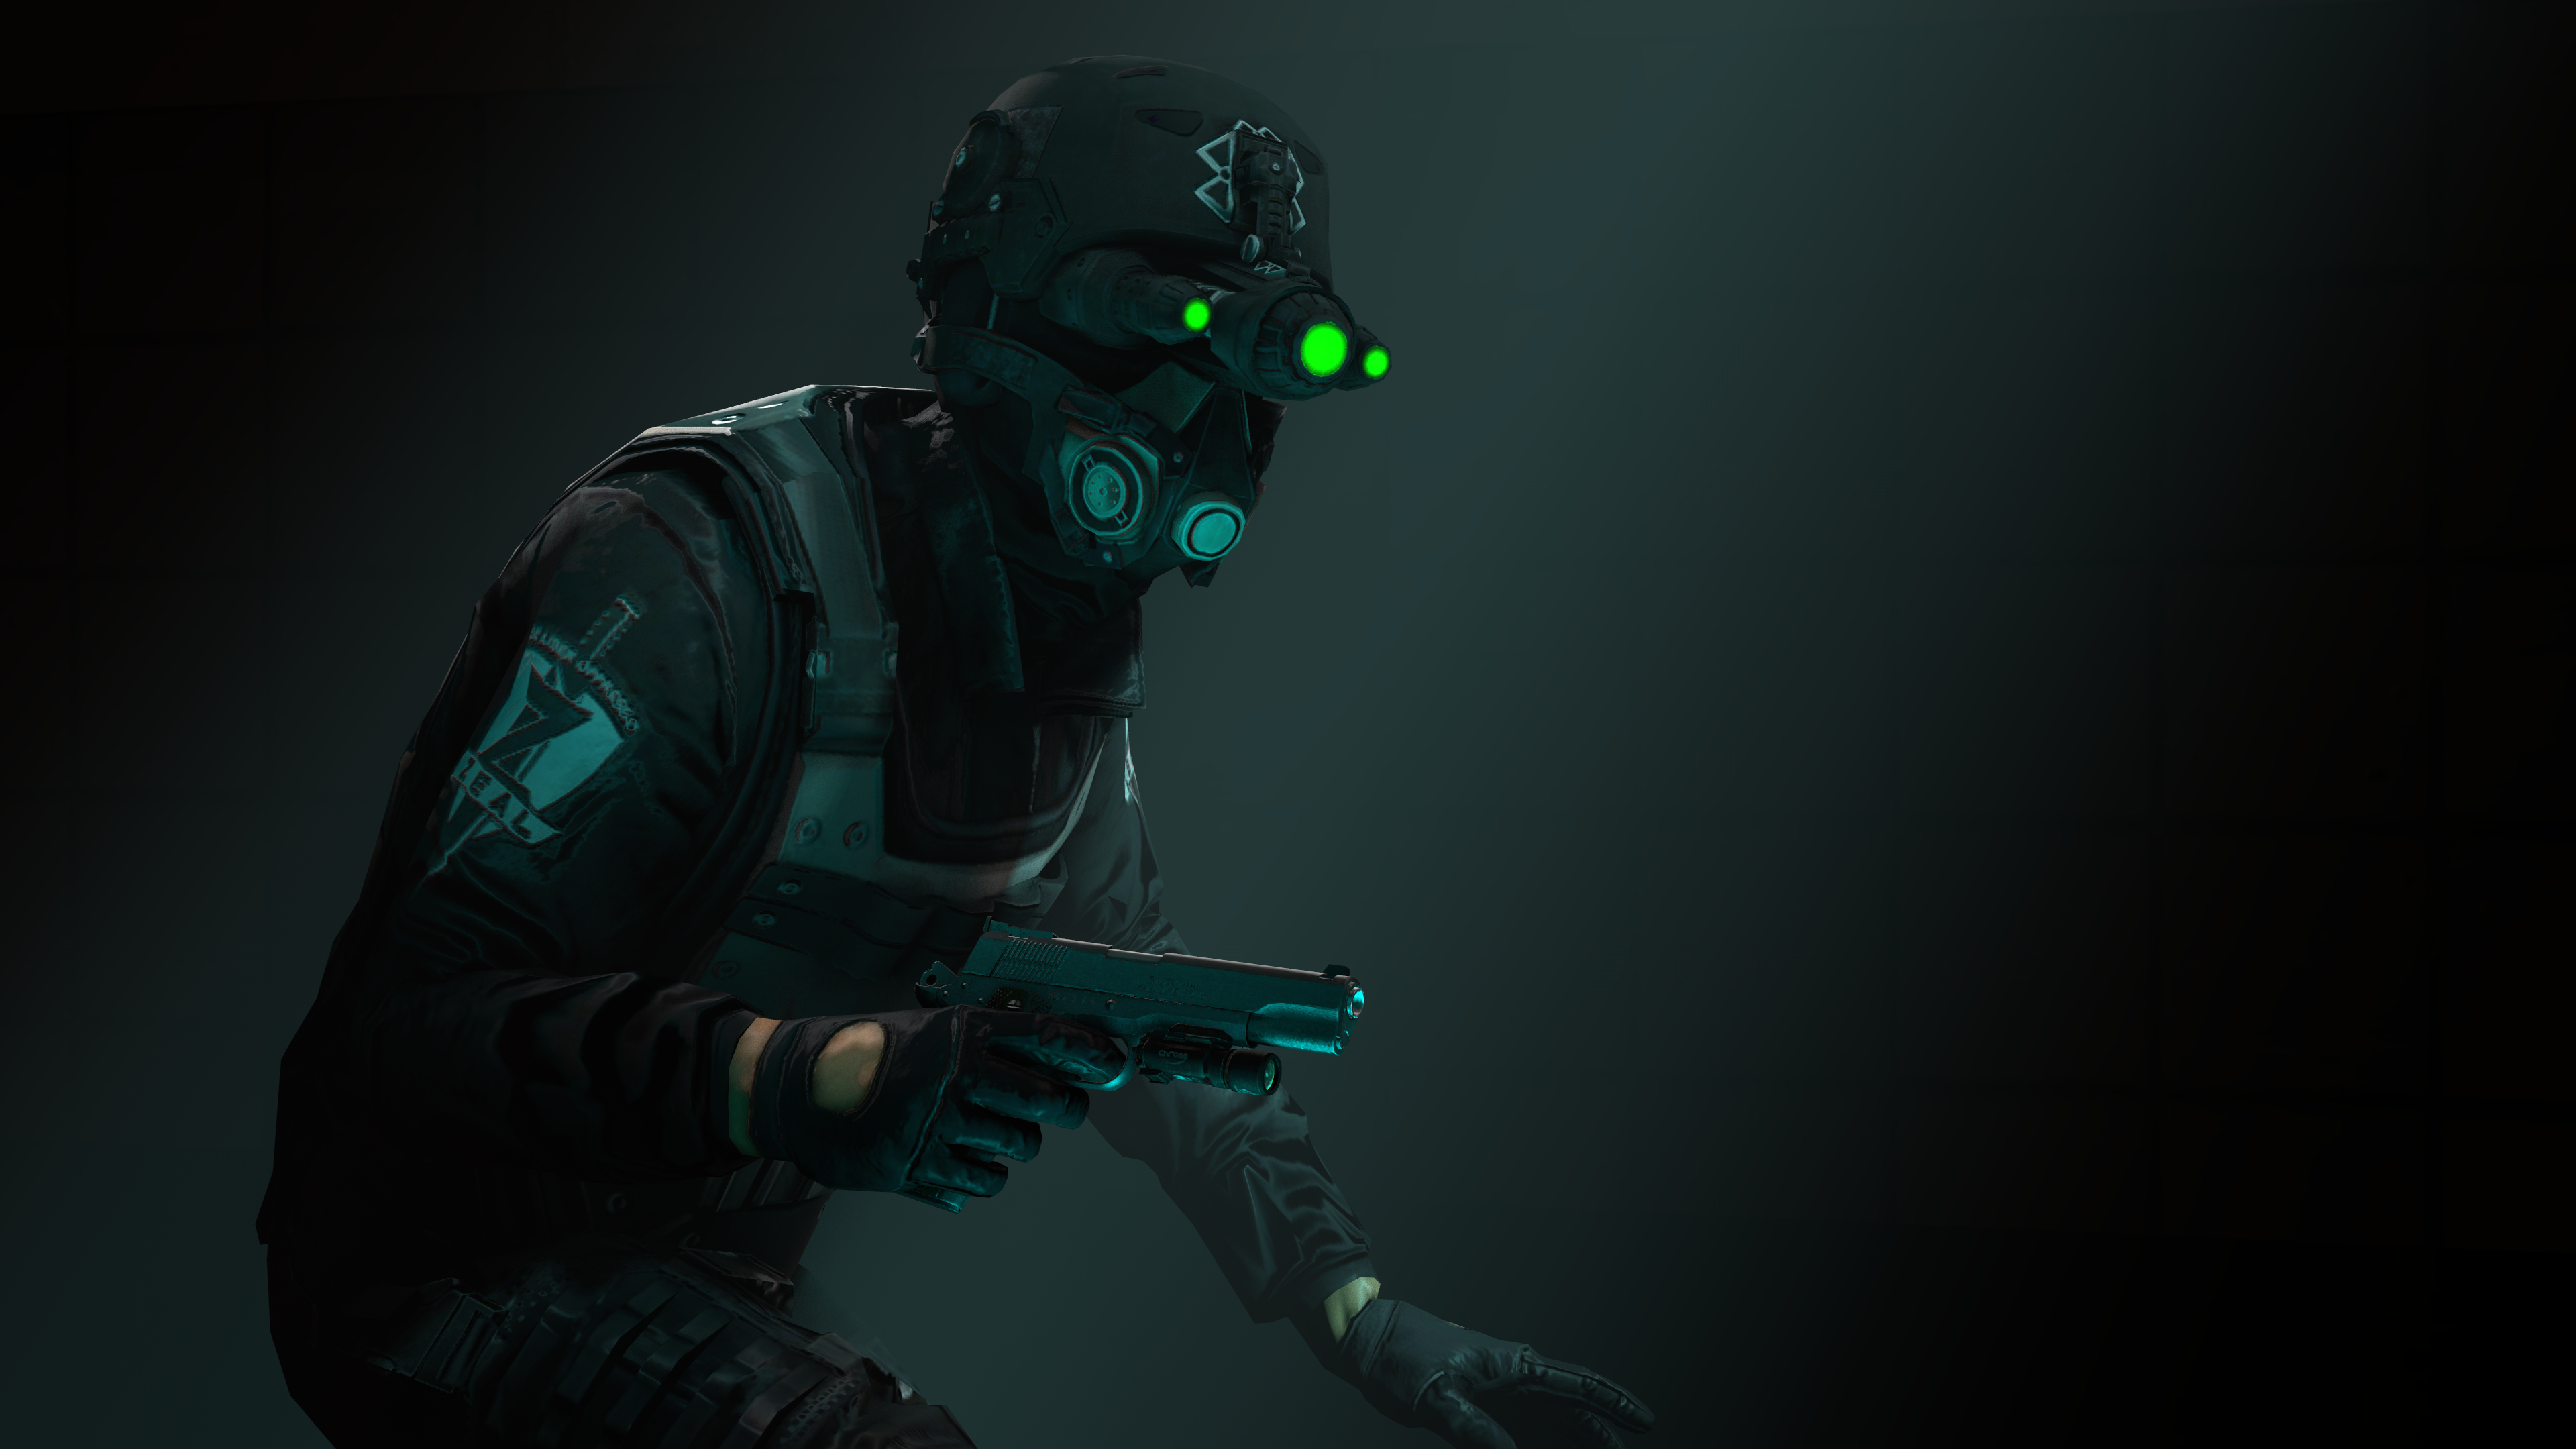 Cloaker Payday Payday 2 3840x2160